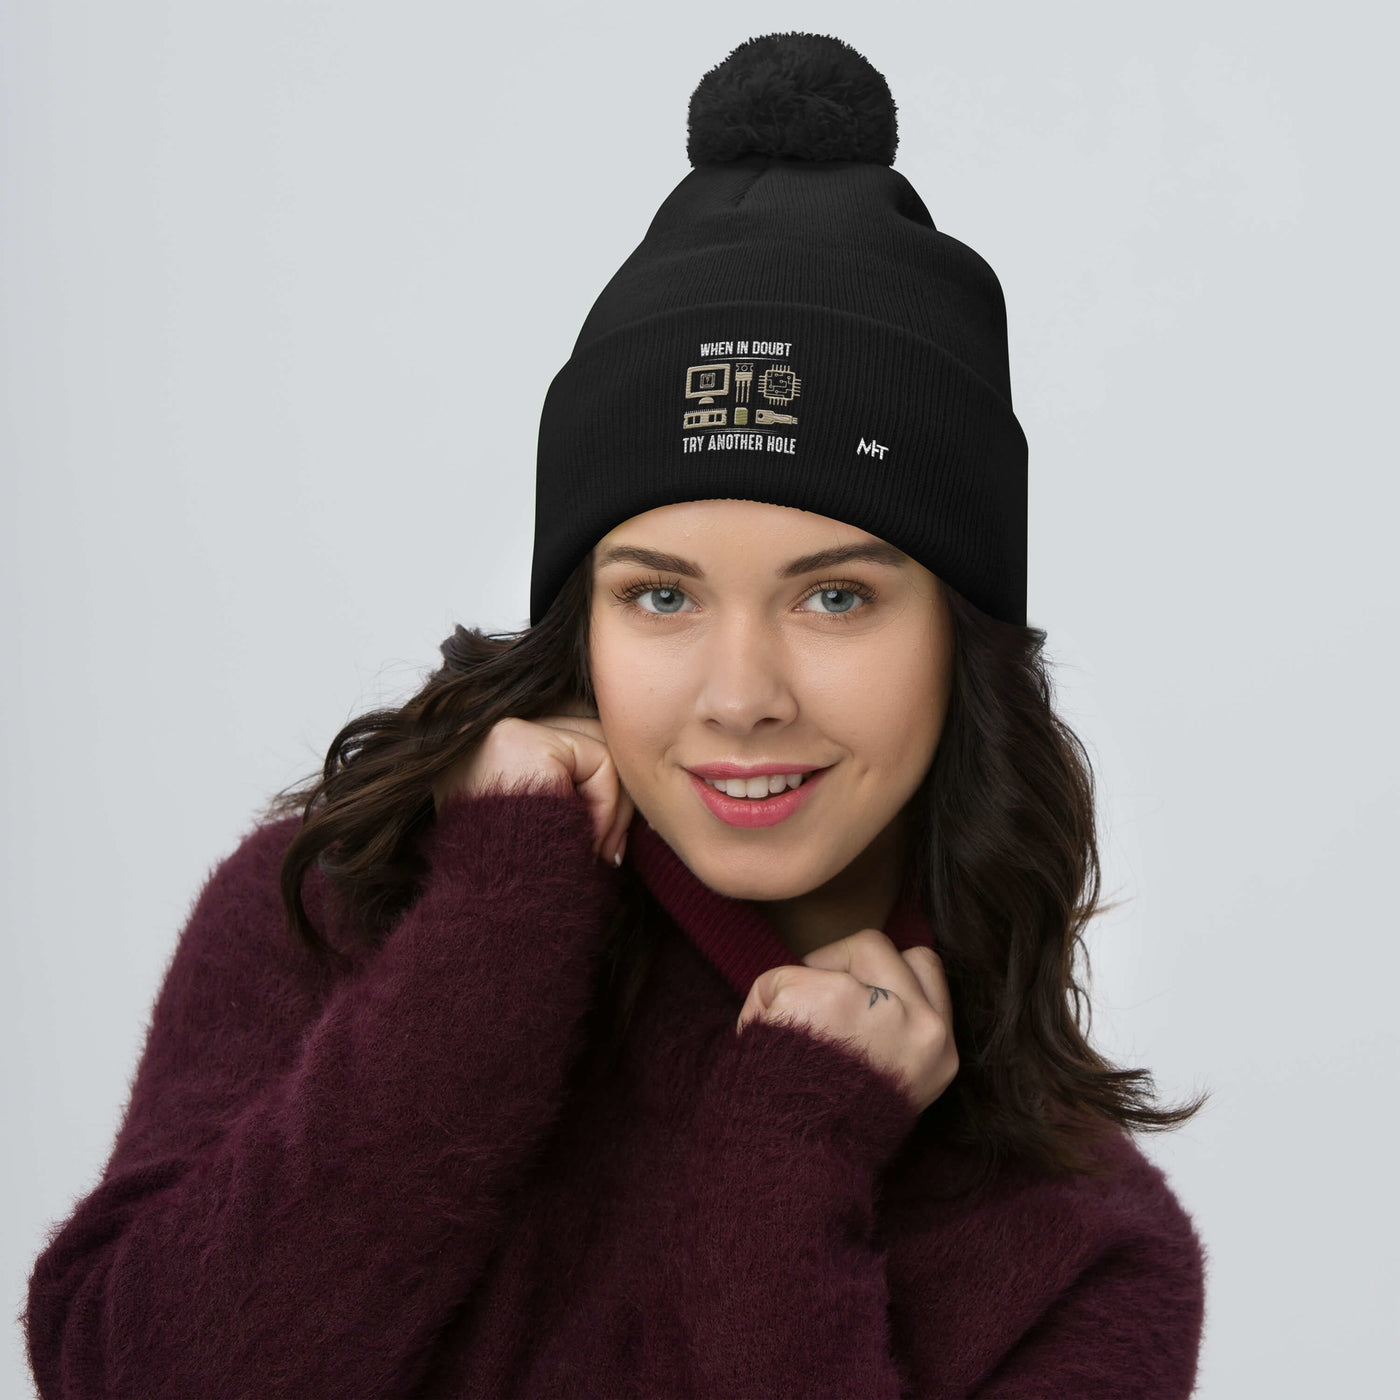 When in doubt, Try another hole V1 - Pom-Pom Beanie